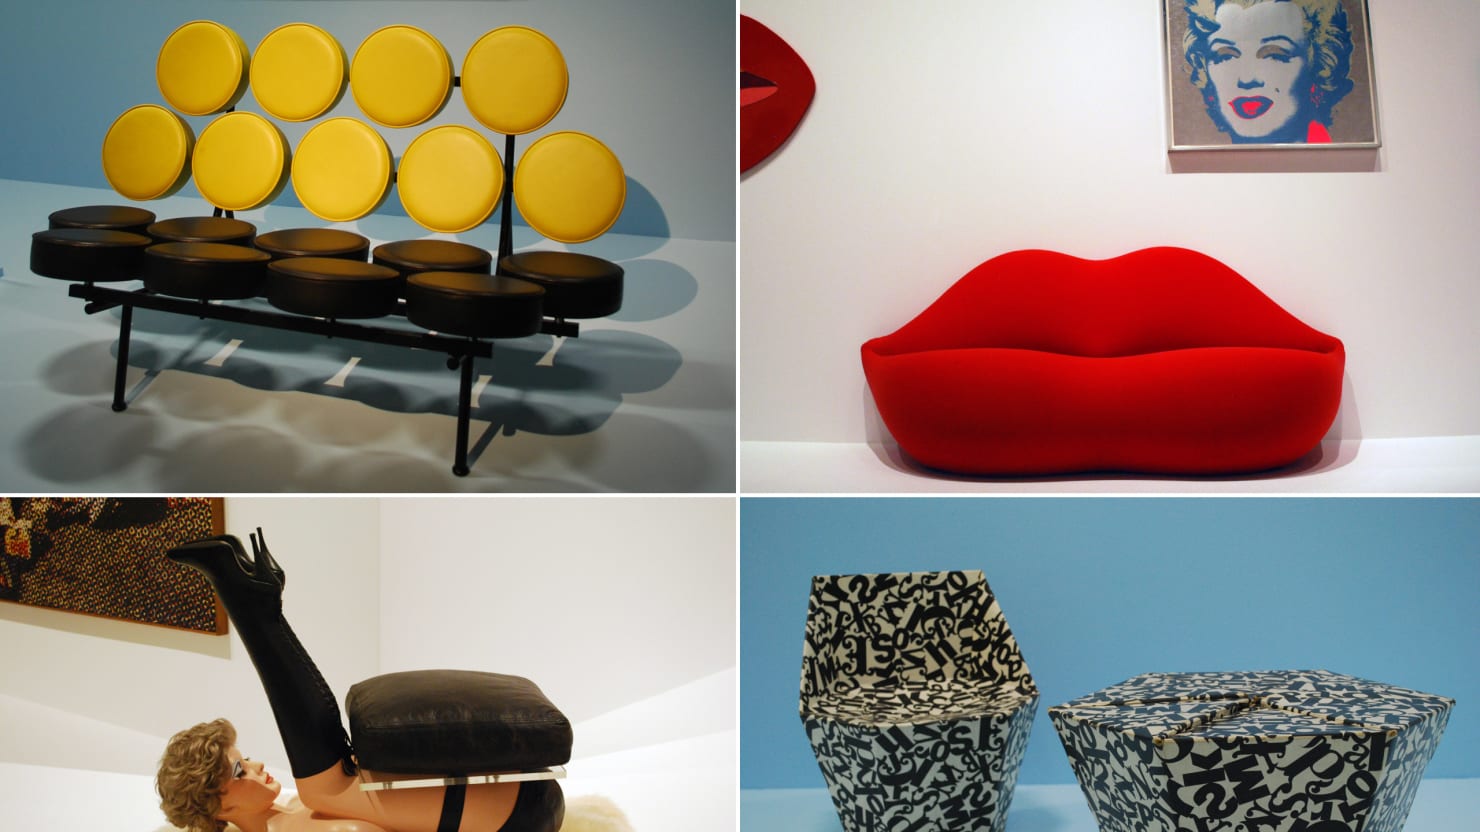 15 Most Bonkers Chairs at Pop Art Design in London